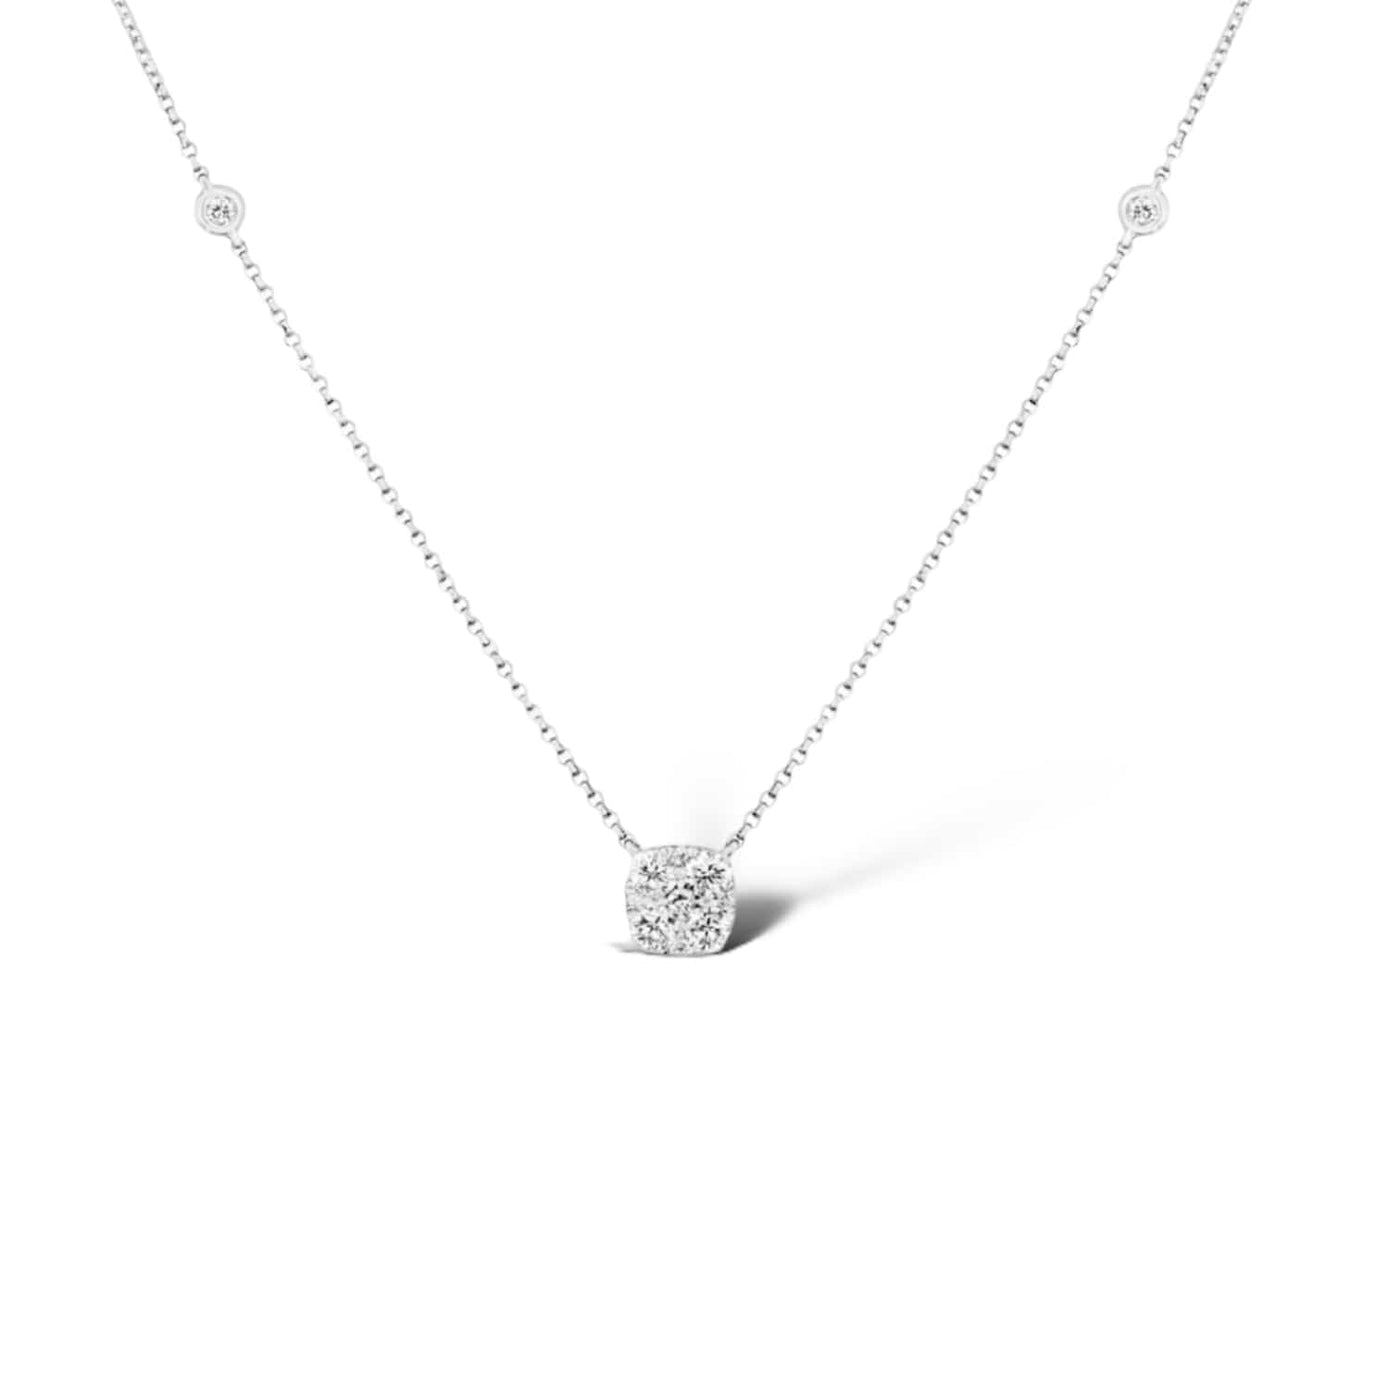 HANGING CUSHION PENDANT WITH DIAMONDS ON THE CHAINS